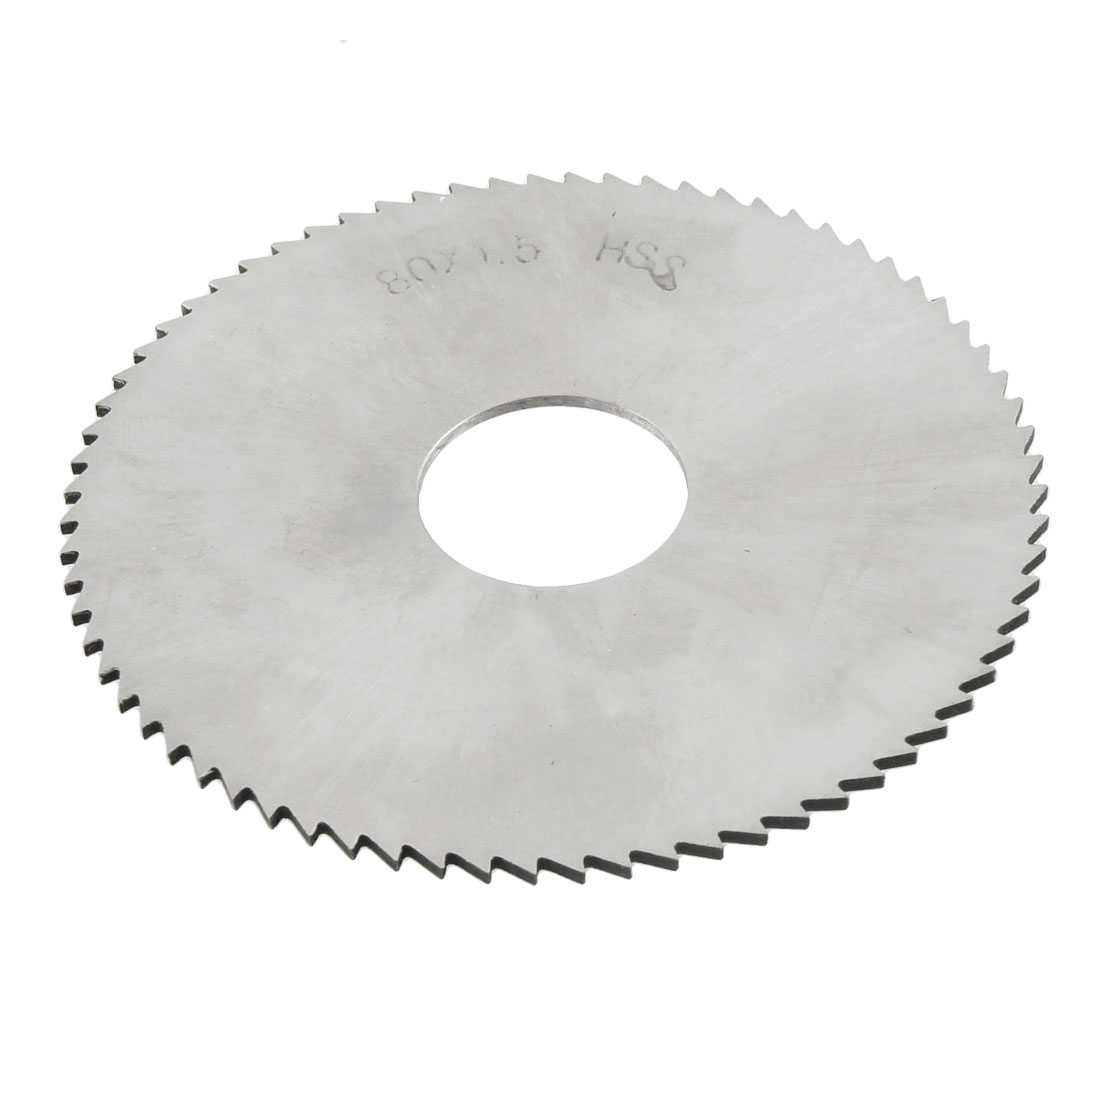 Unique Bargains 72T 80mm OD 1.5mm Thickness HSS Circular Slitting Saw